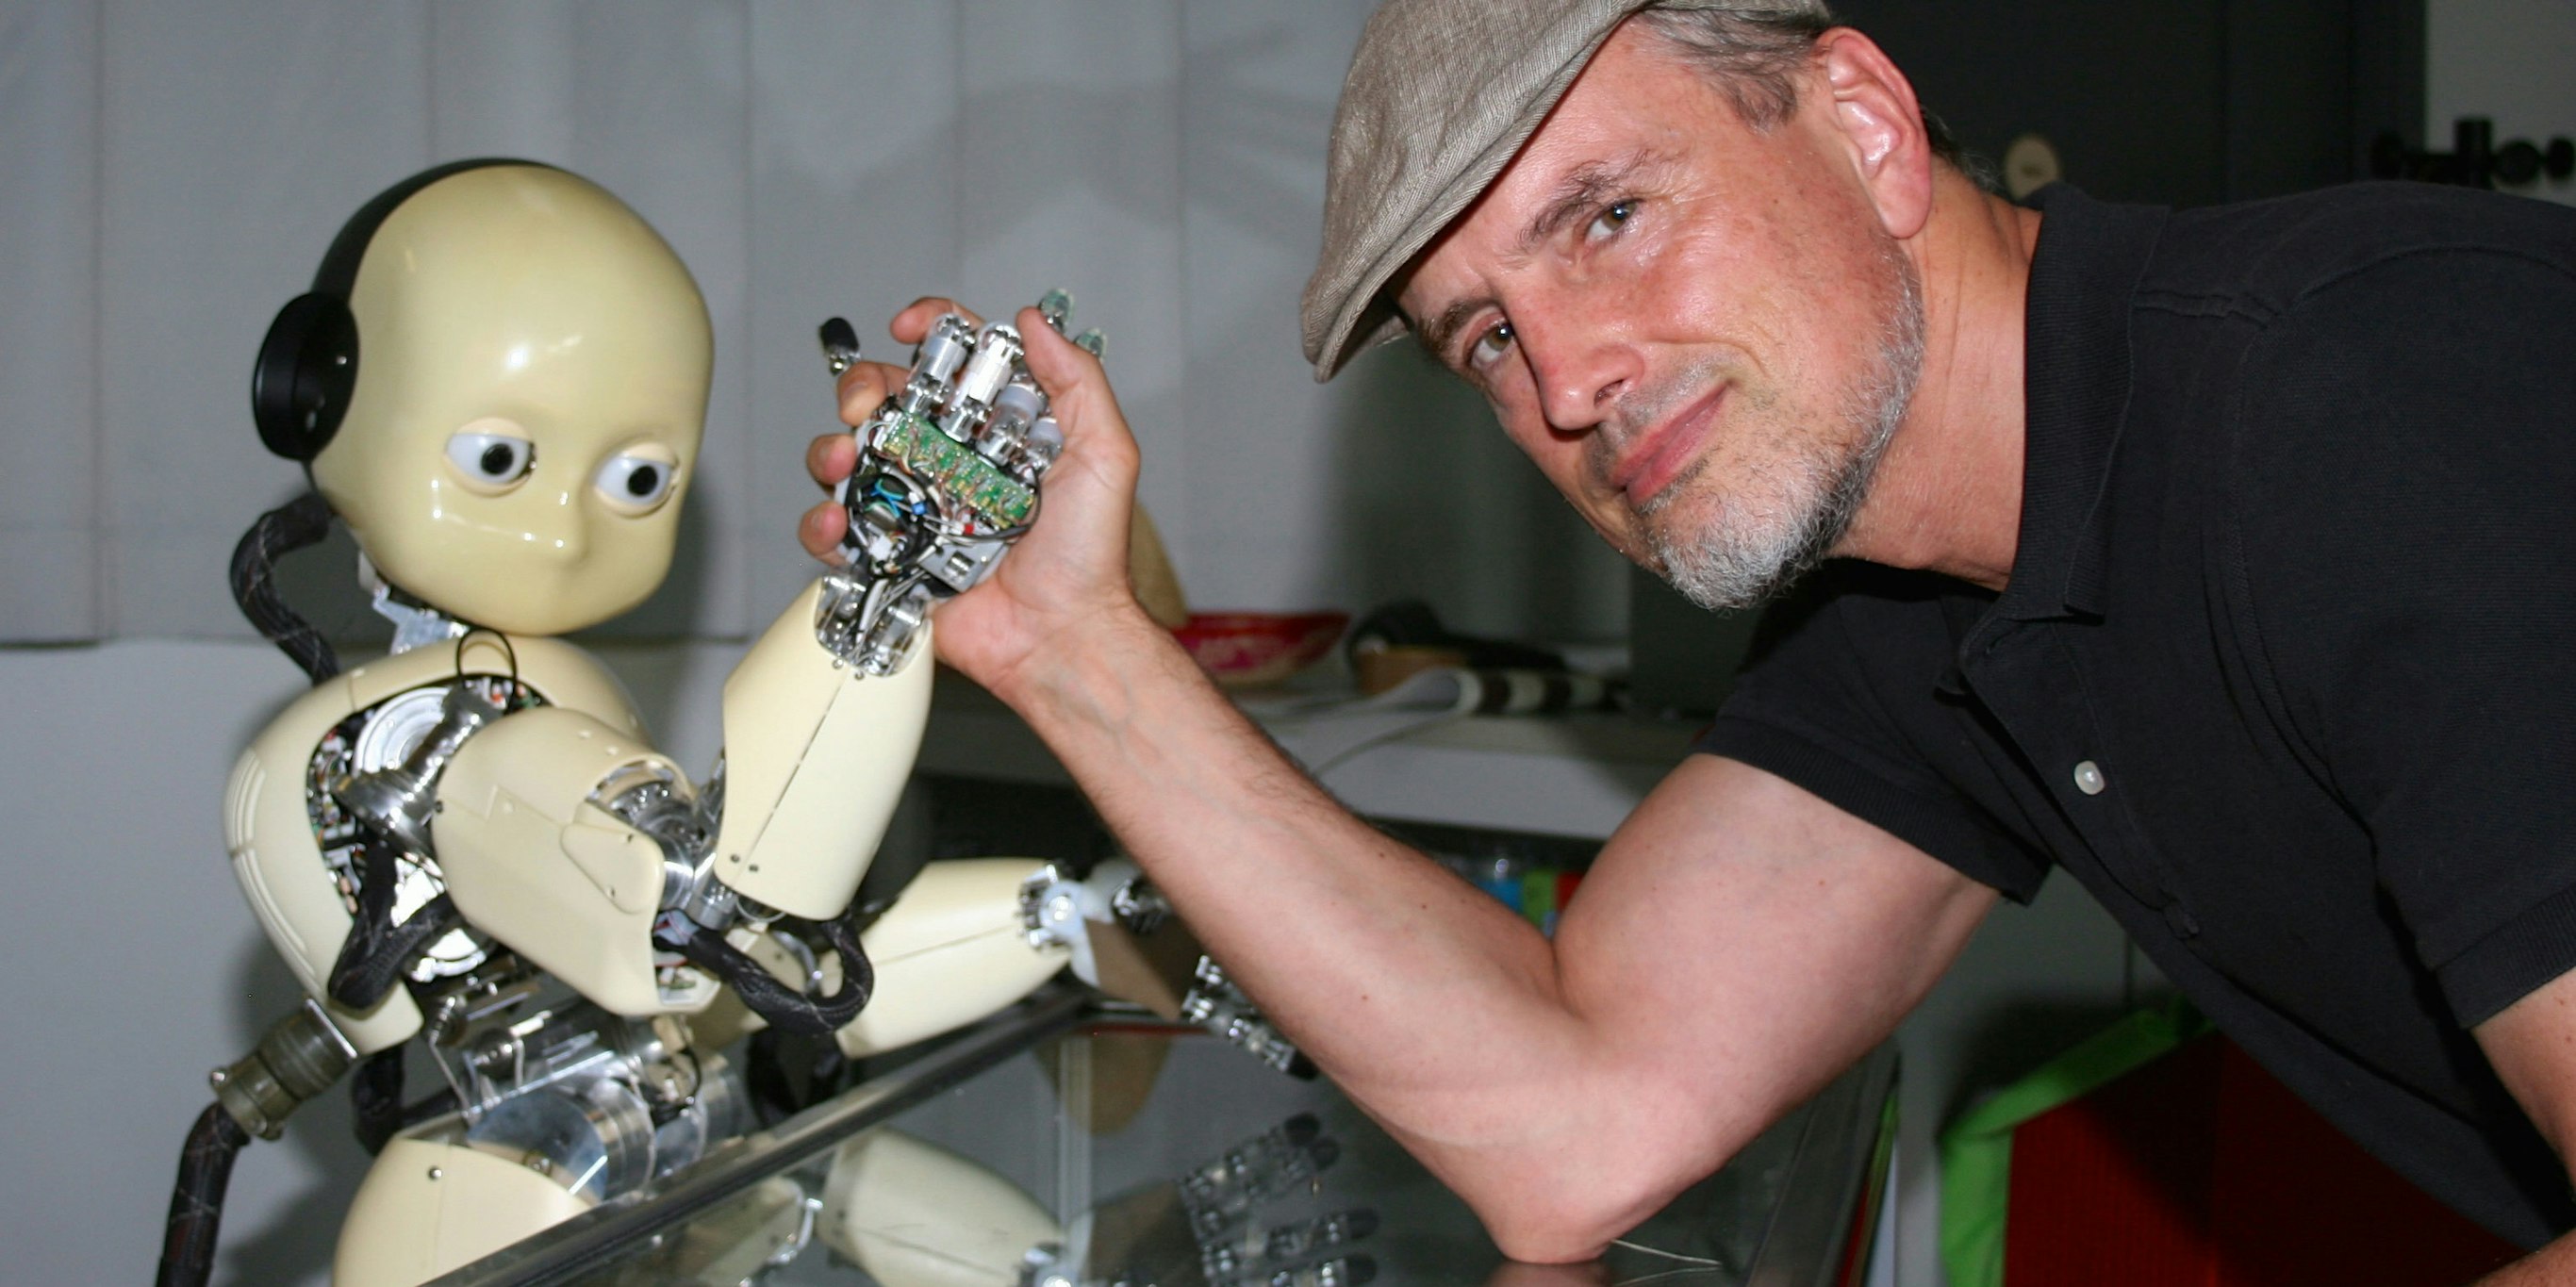 Schmidhuber with an android.